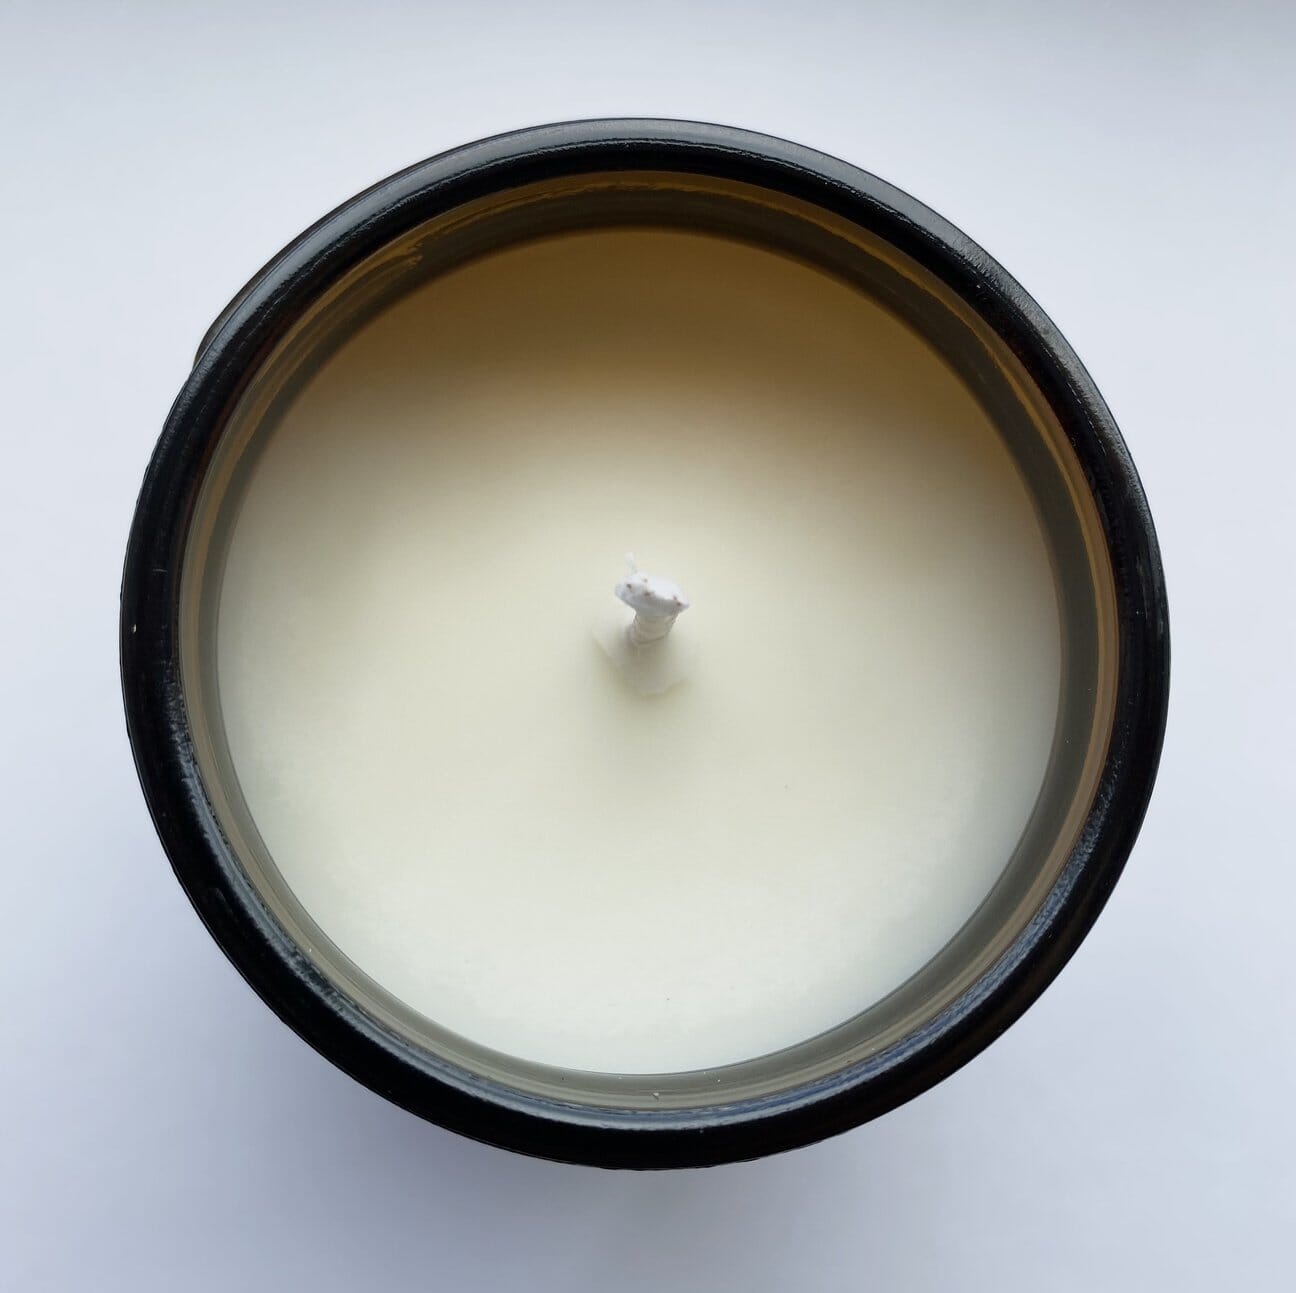 Amber & Musk Soy Wax Candle Soy Wax Candles Handmade Candle Co. 